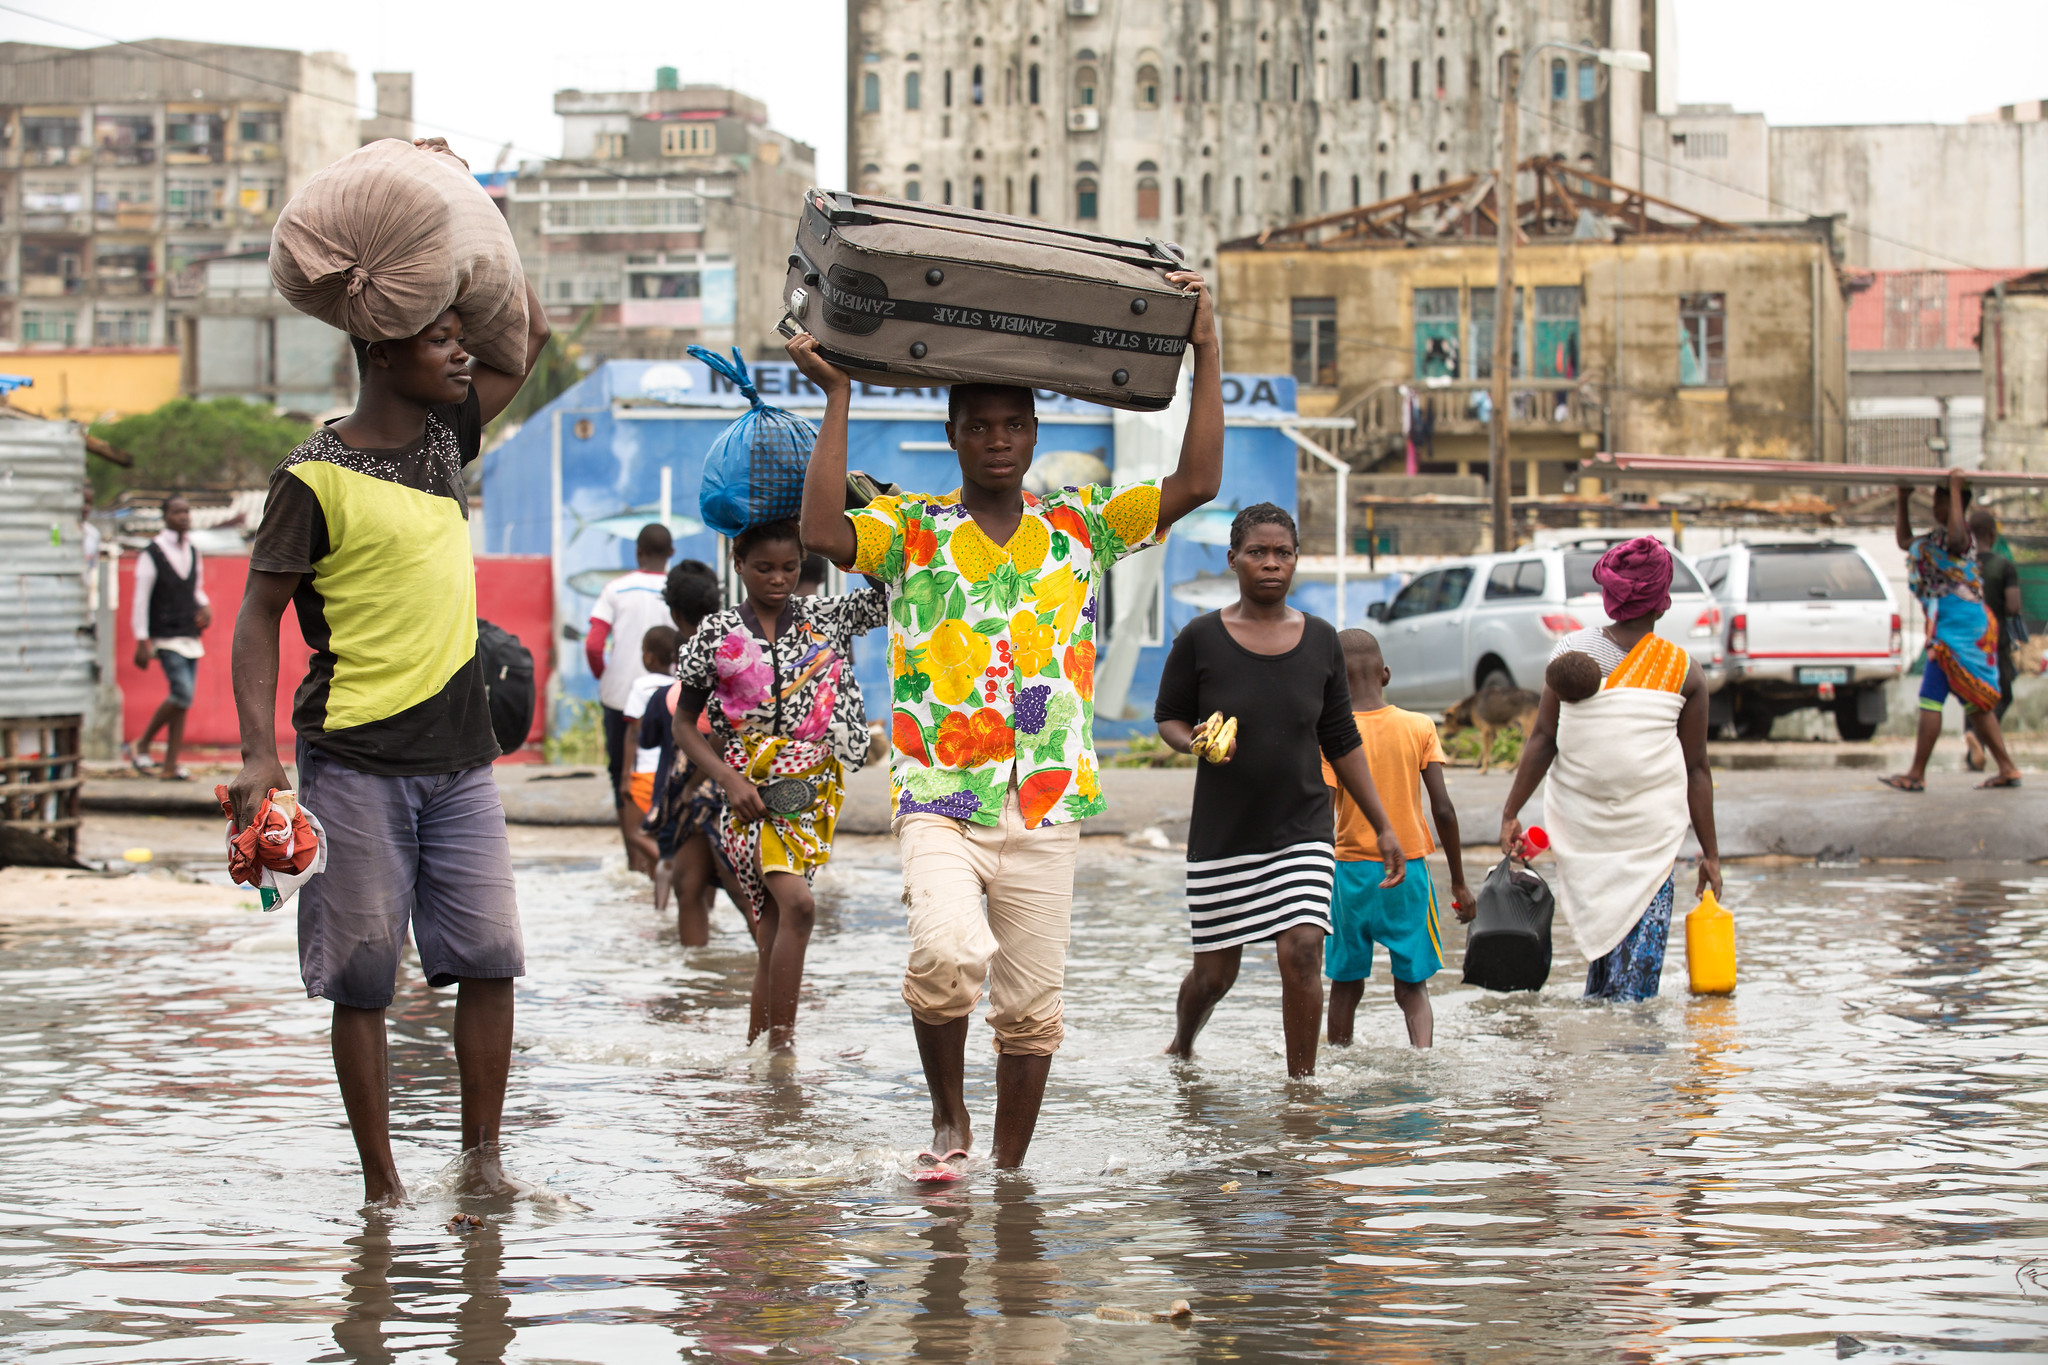 Cyclone Idai shows why long-term disaster resilience is so crucial